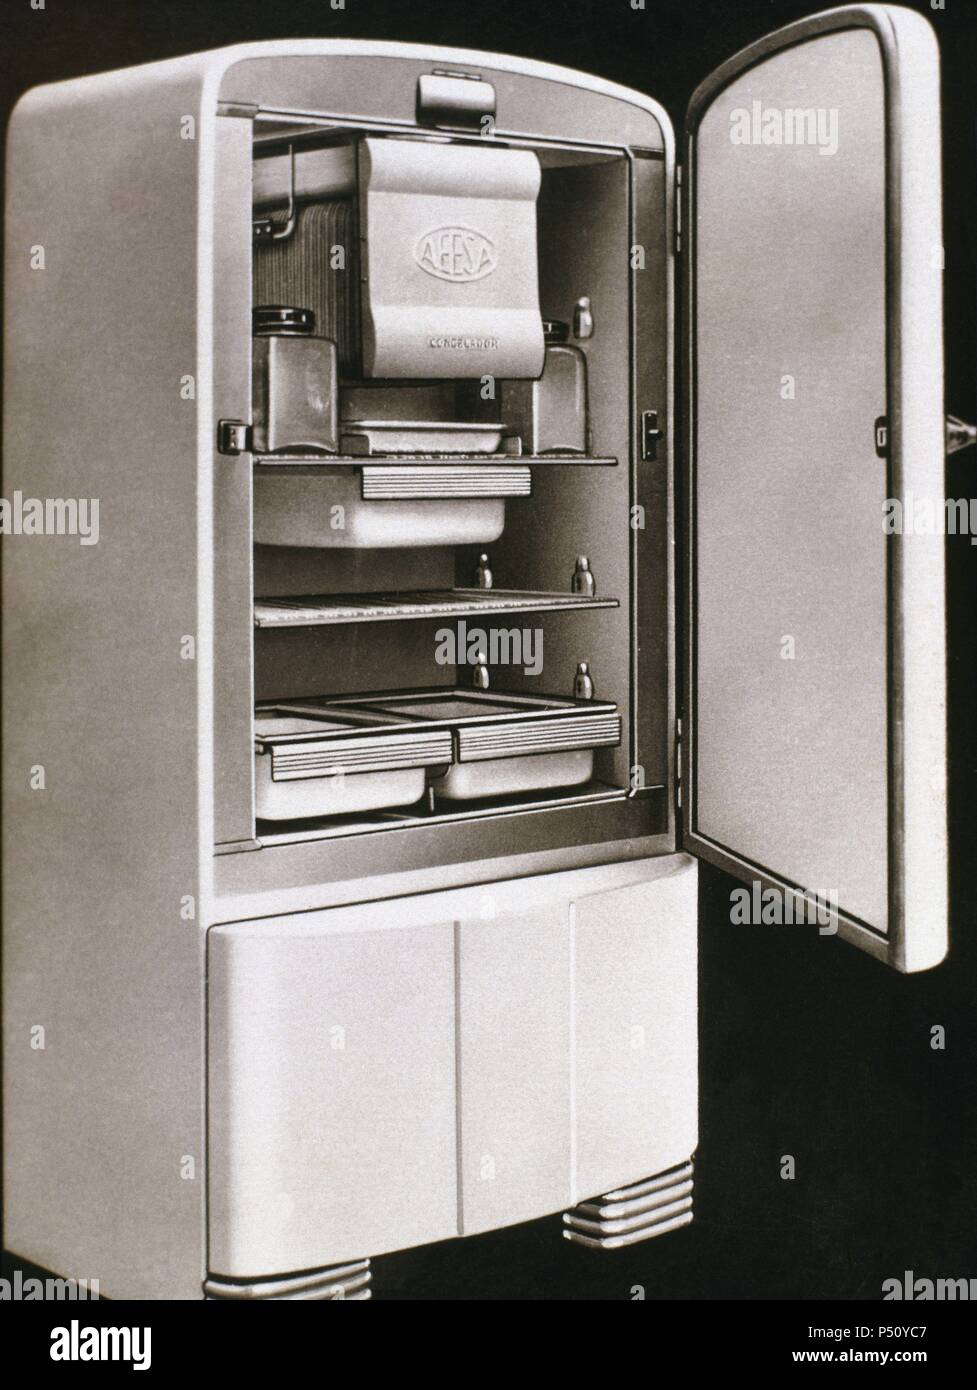 First electric refrigerator produced in Spain by AEESA brand (Anglo-Espanola de Electricidad SA). 50's. Stock Photo